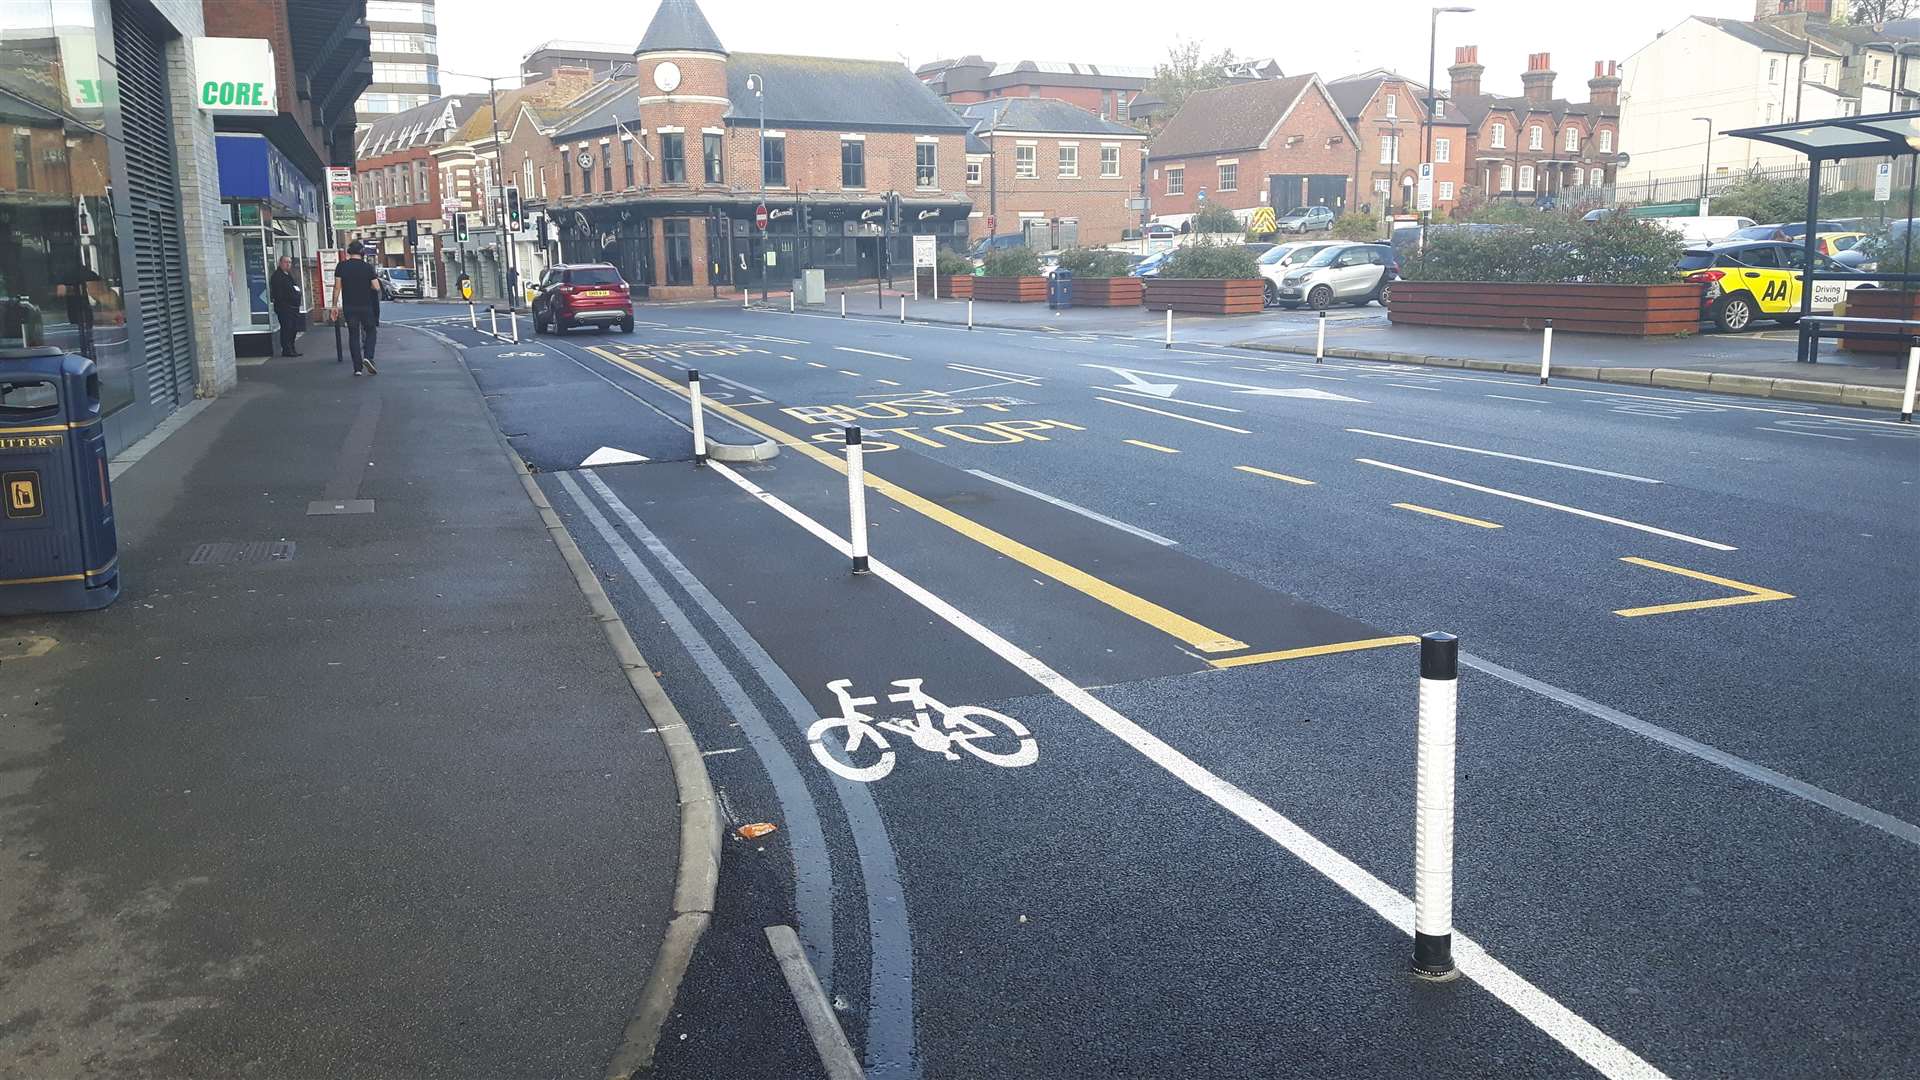 One of the pop-up cycle lanes in King Street, Maidstone